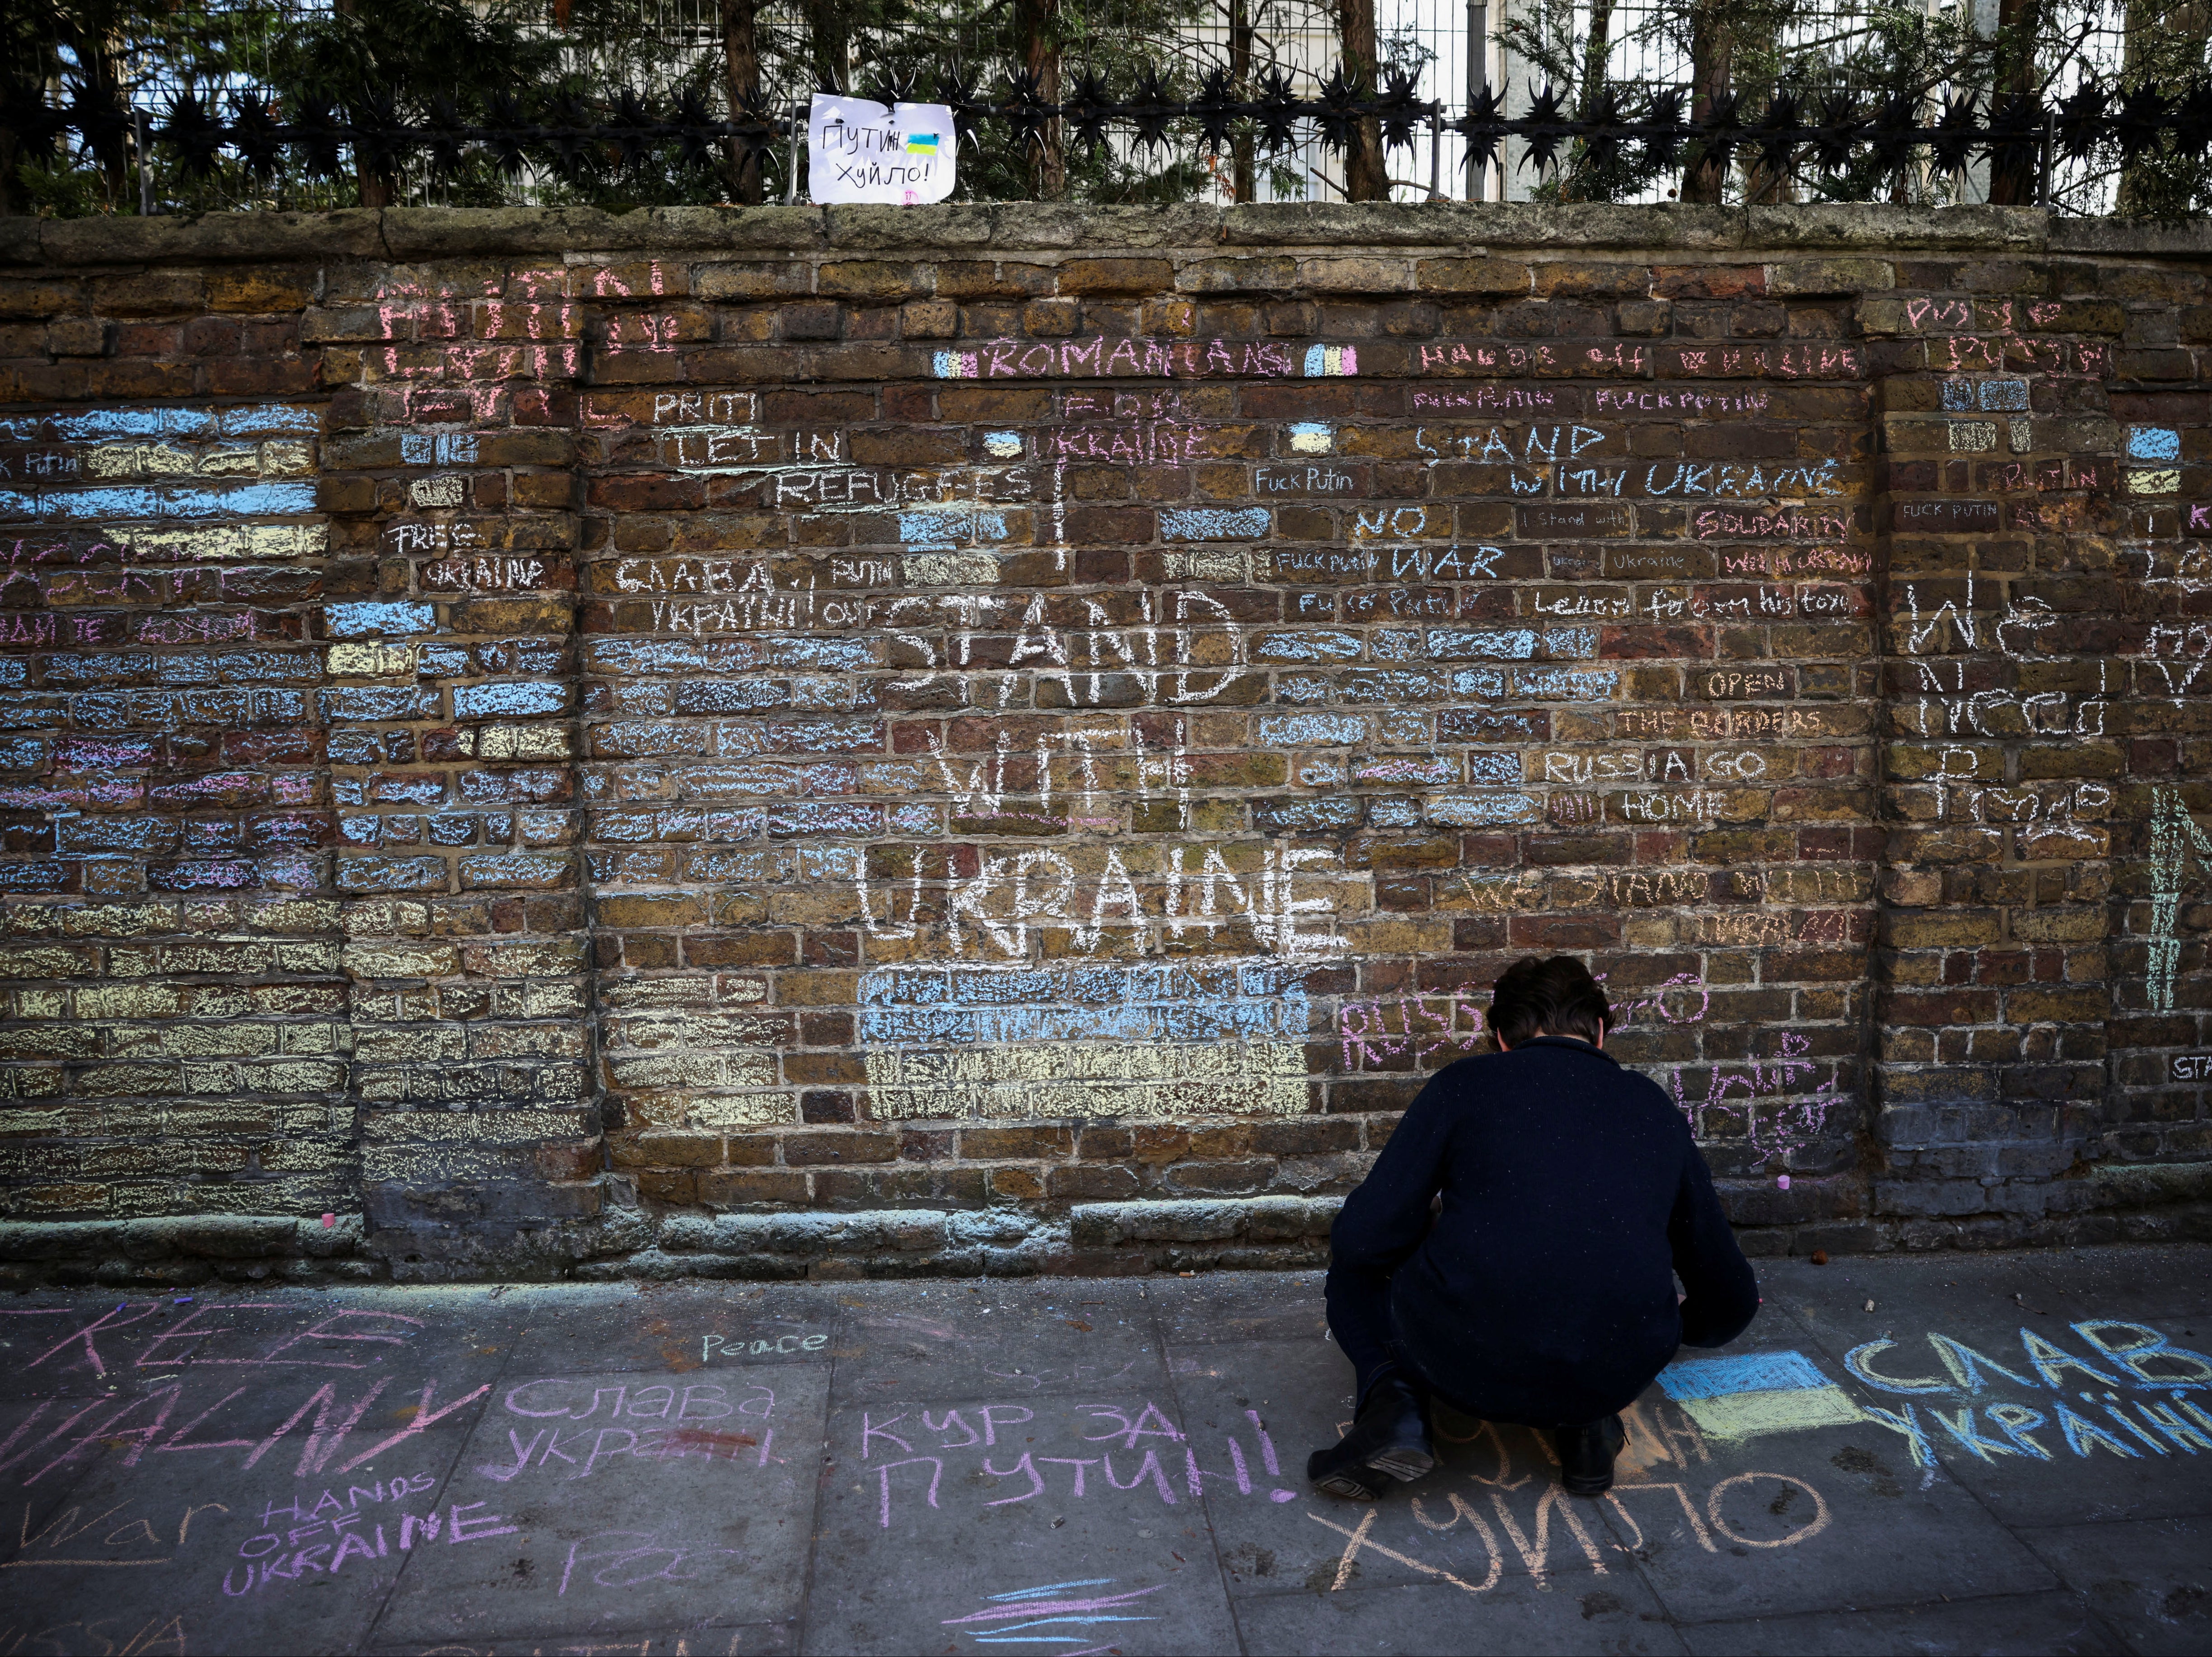 A protester writes on a pavement in front of signs on the wall of the Russian embassy in London during a protest against the war against Ukraine